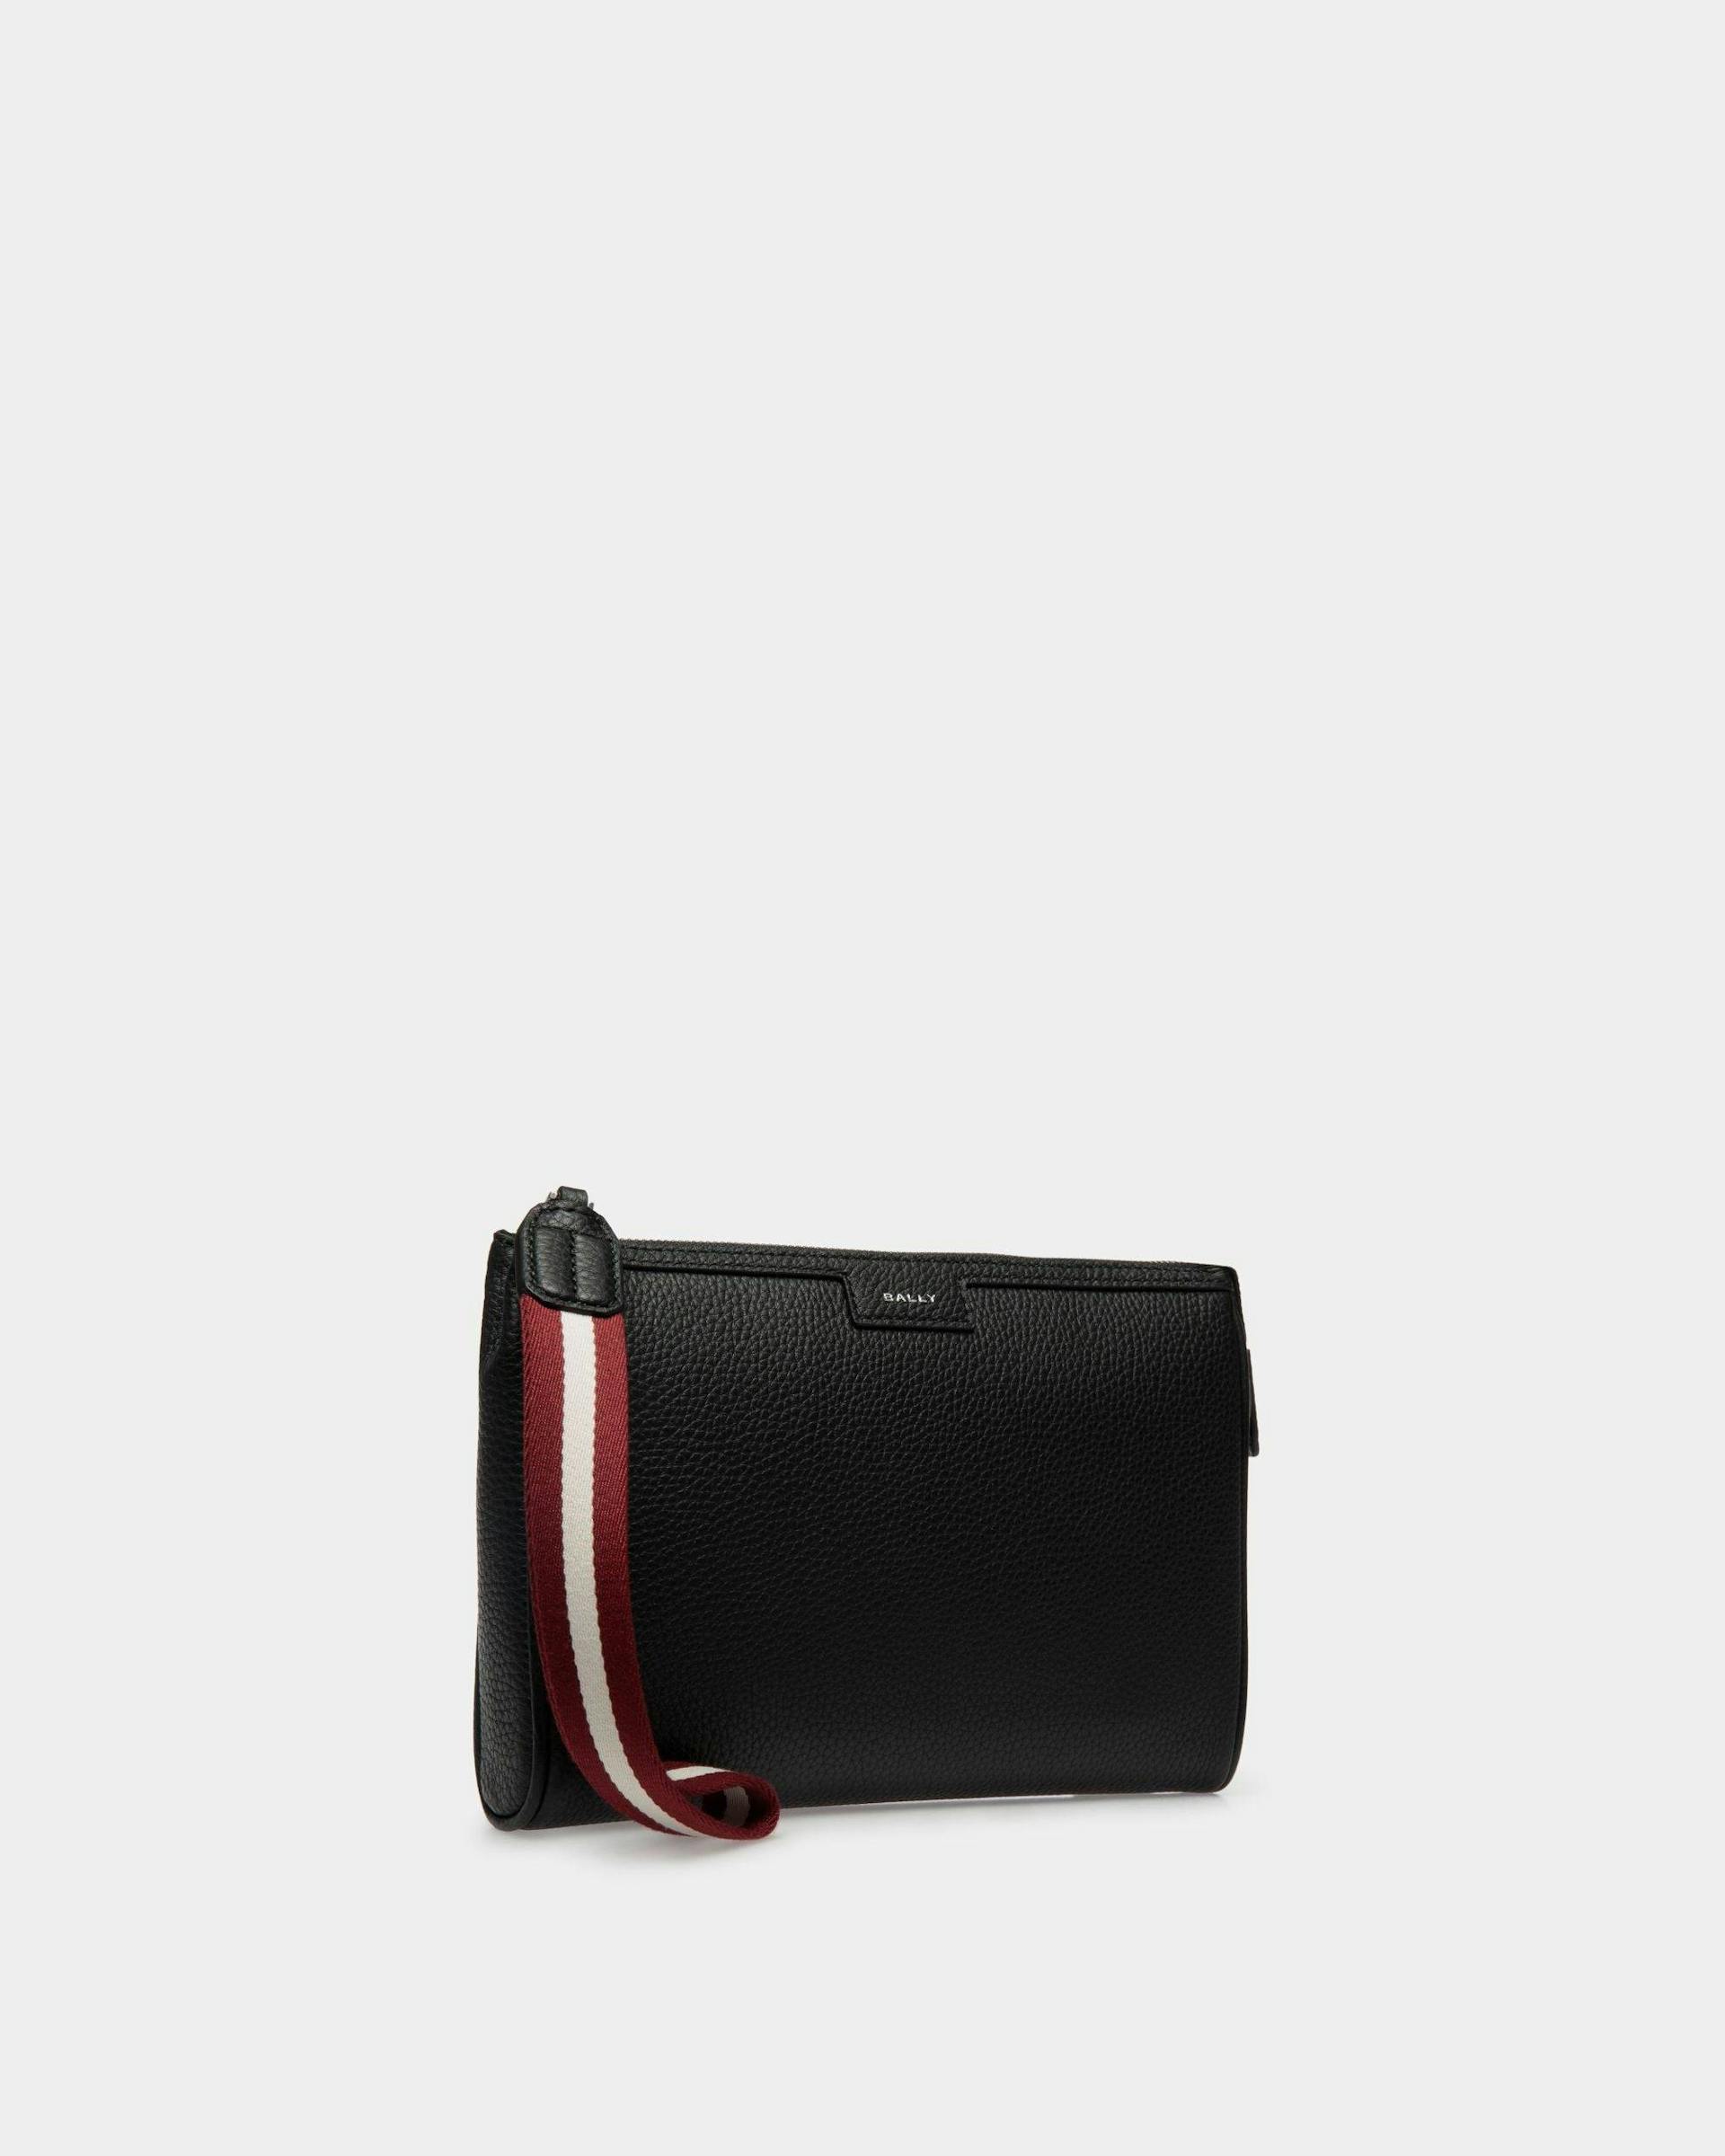 Men's Code Pouch In Black Grained Leather | Bally | Still Life 3/4 Front